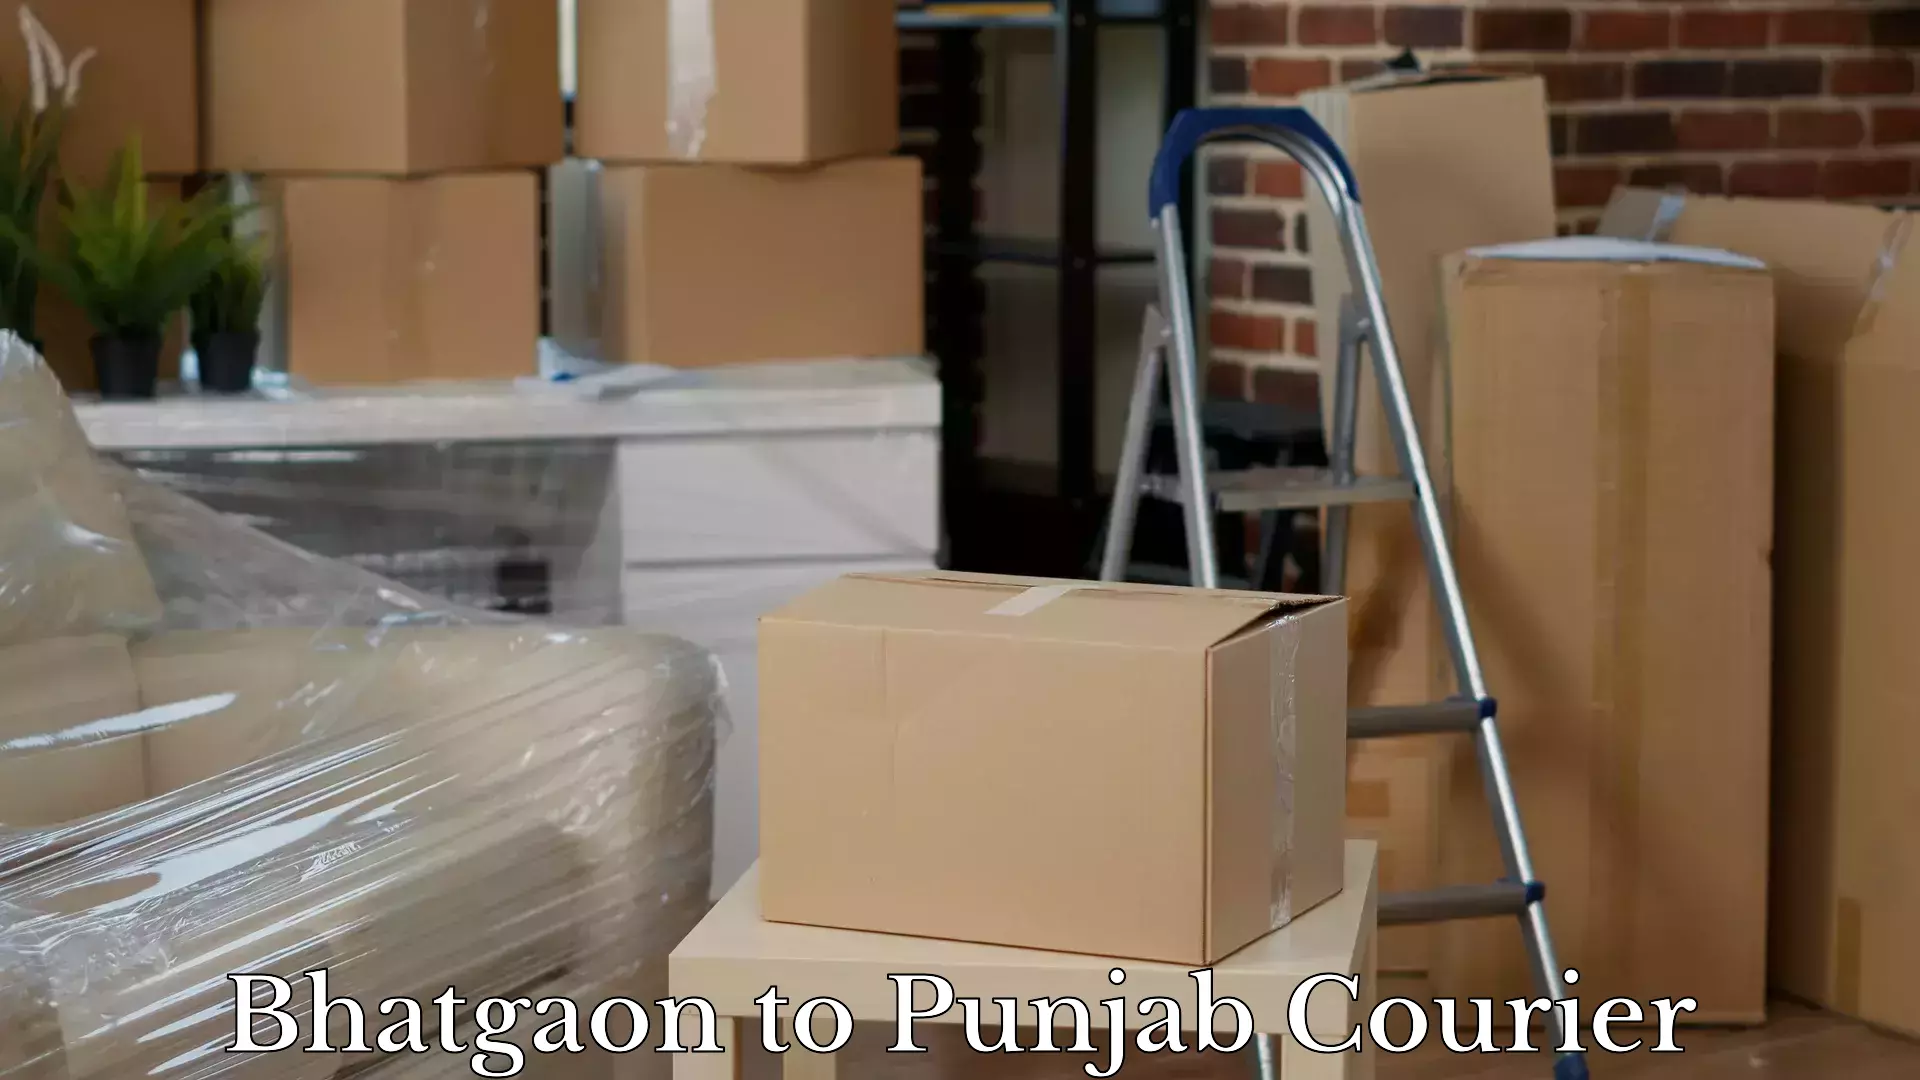 Luggage storage and delivery Bhatgaon to Ludhiana